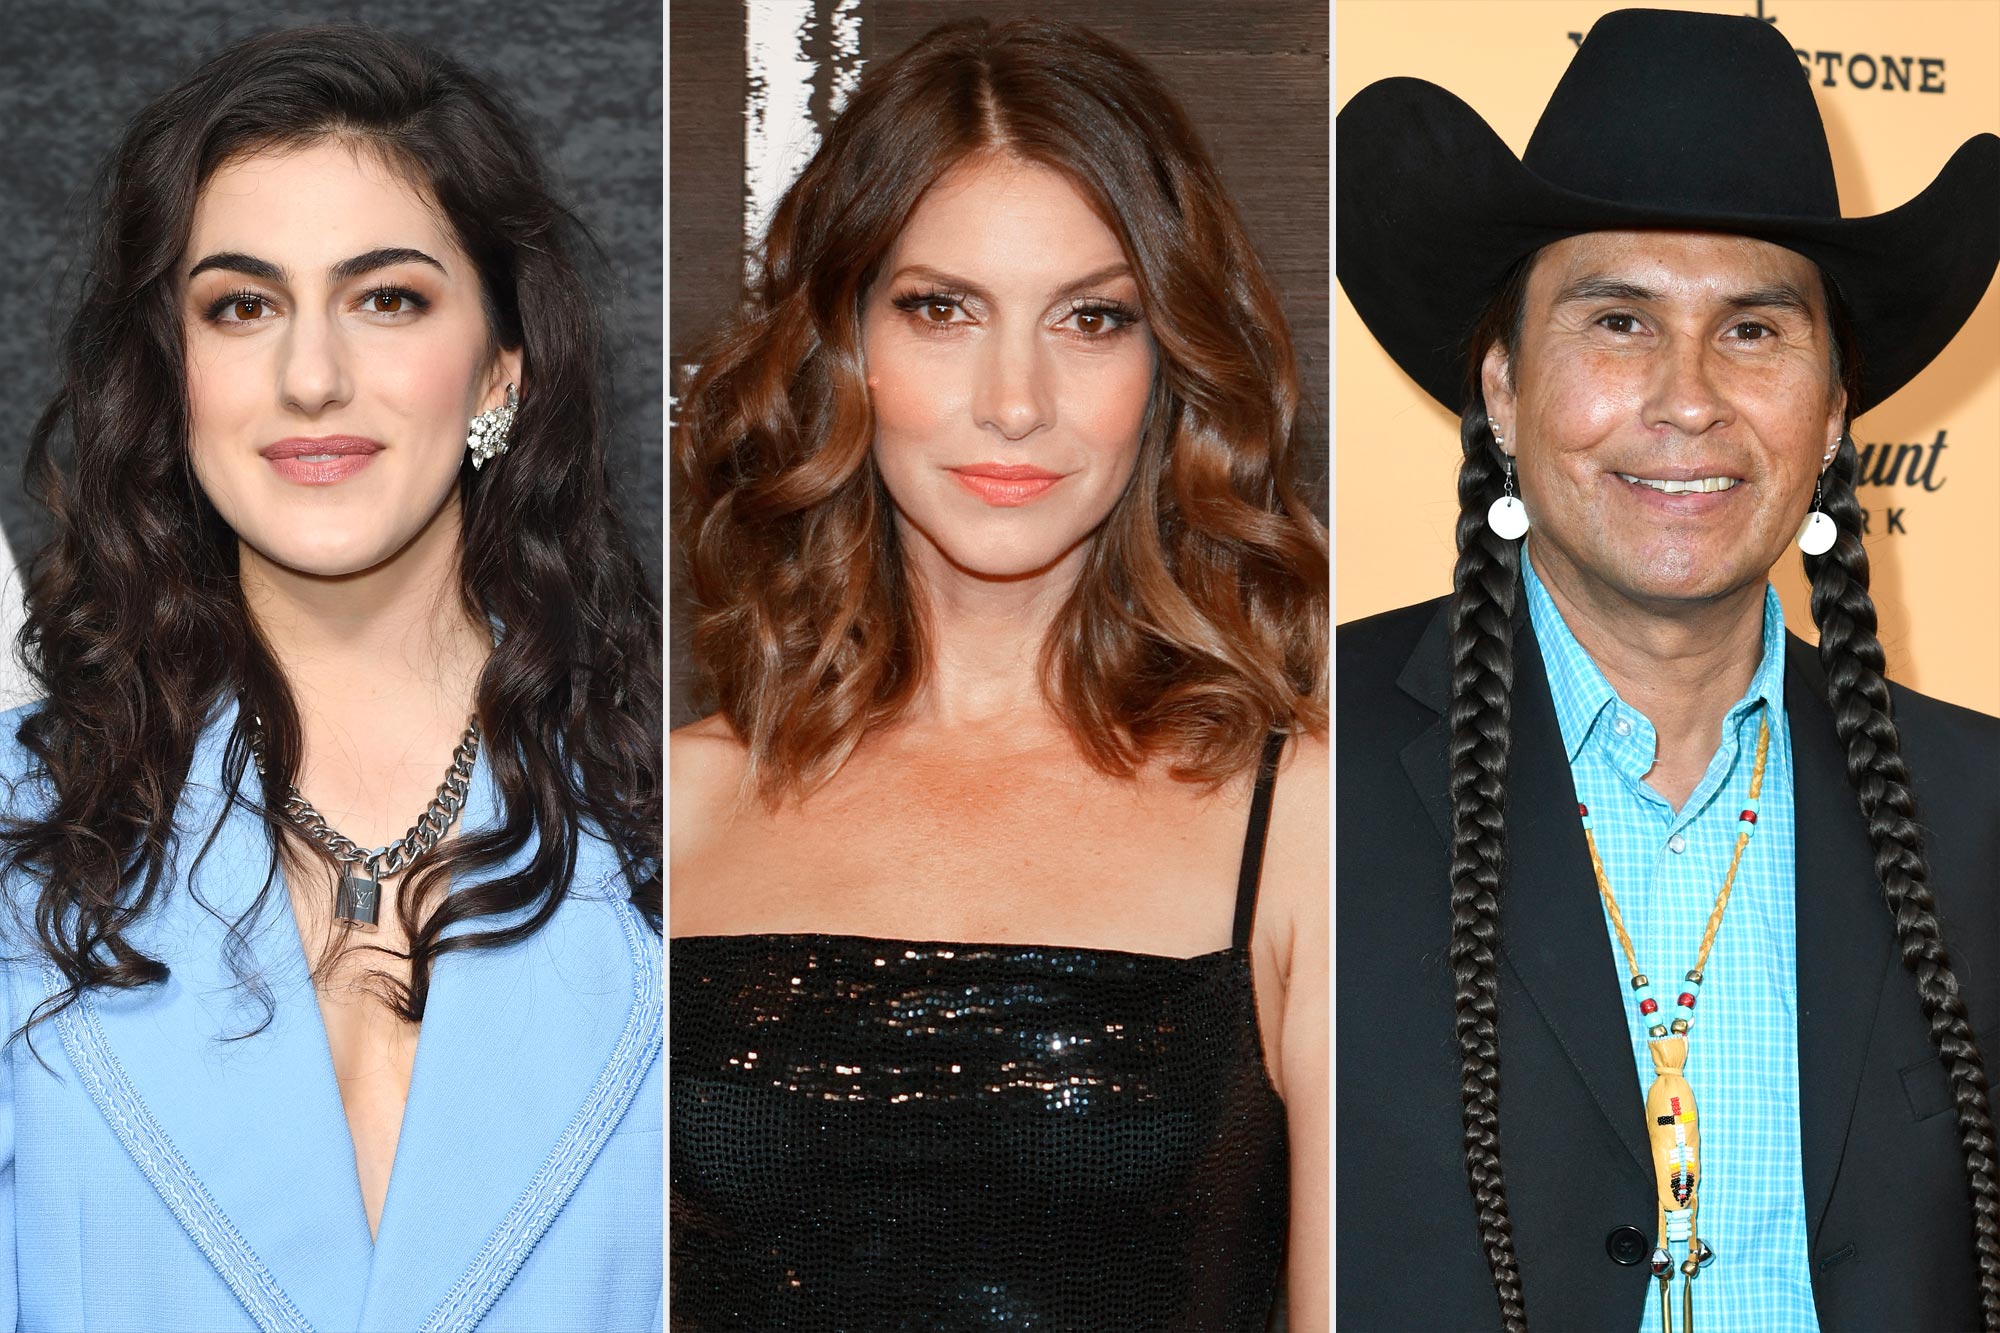 Yellowstone season 5 adds new cast members, promotes fanfavorites to